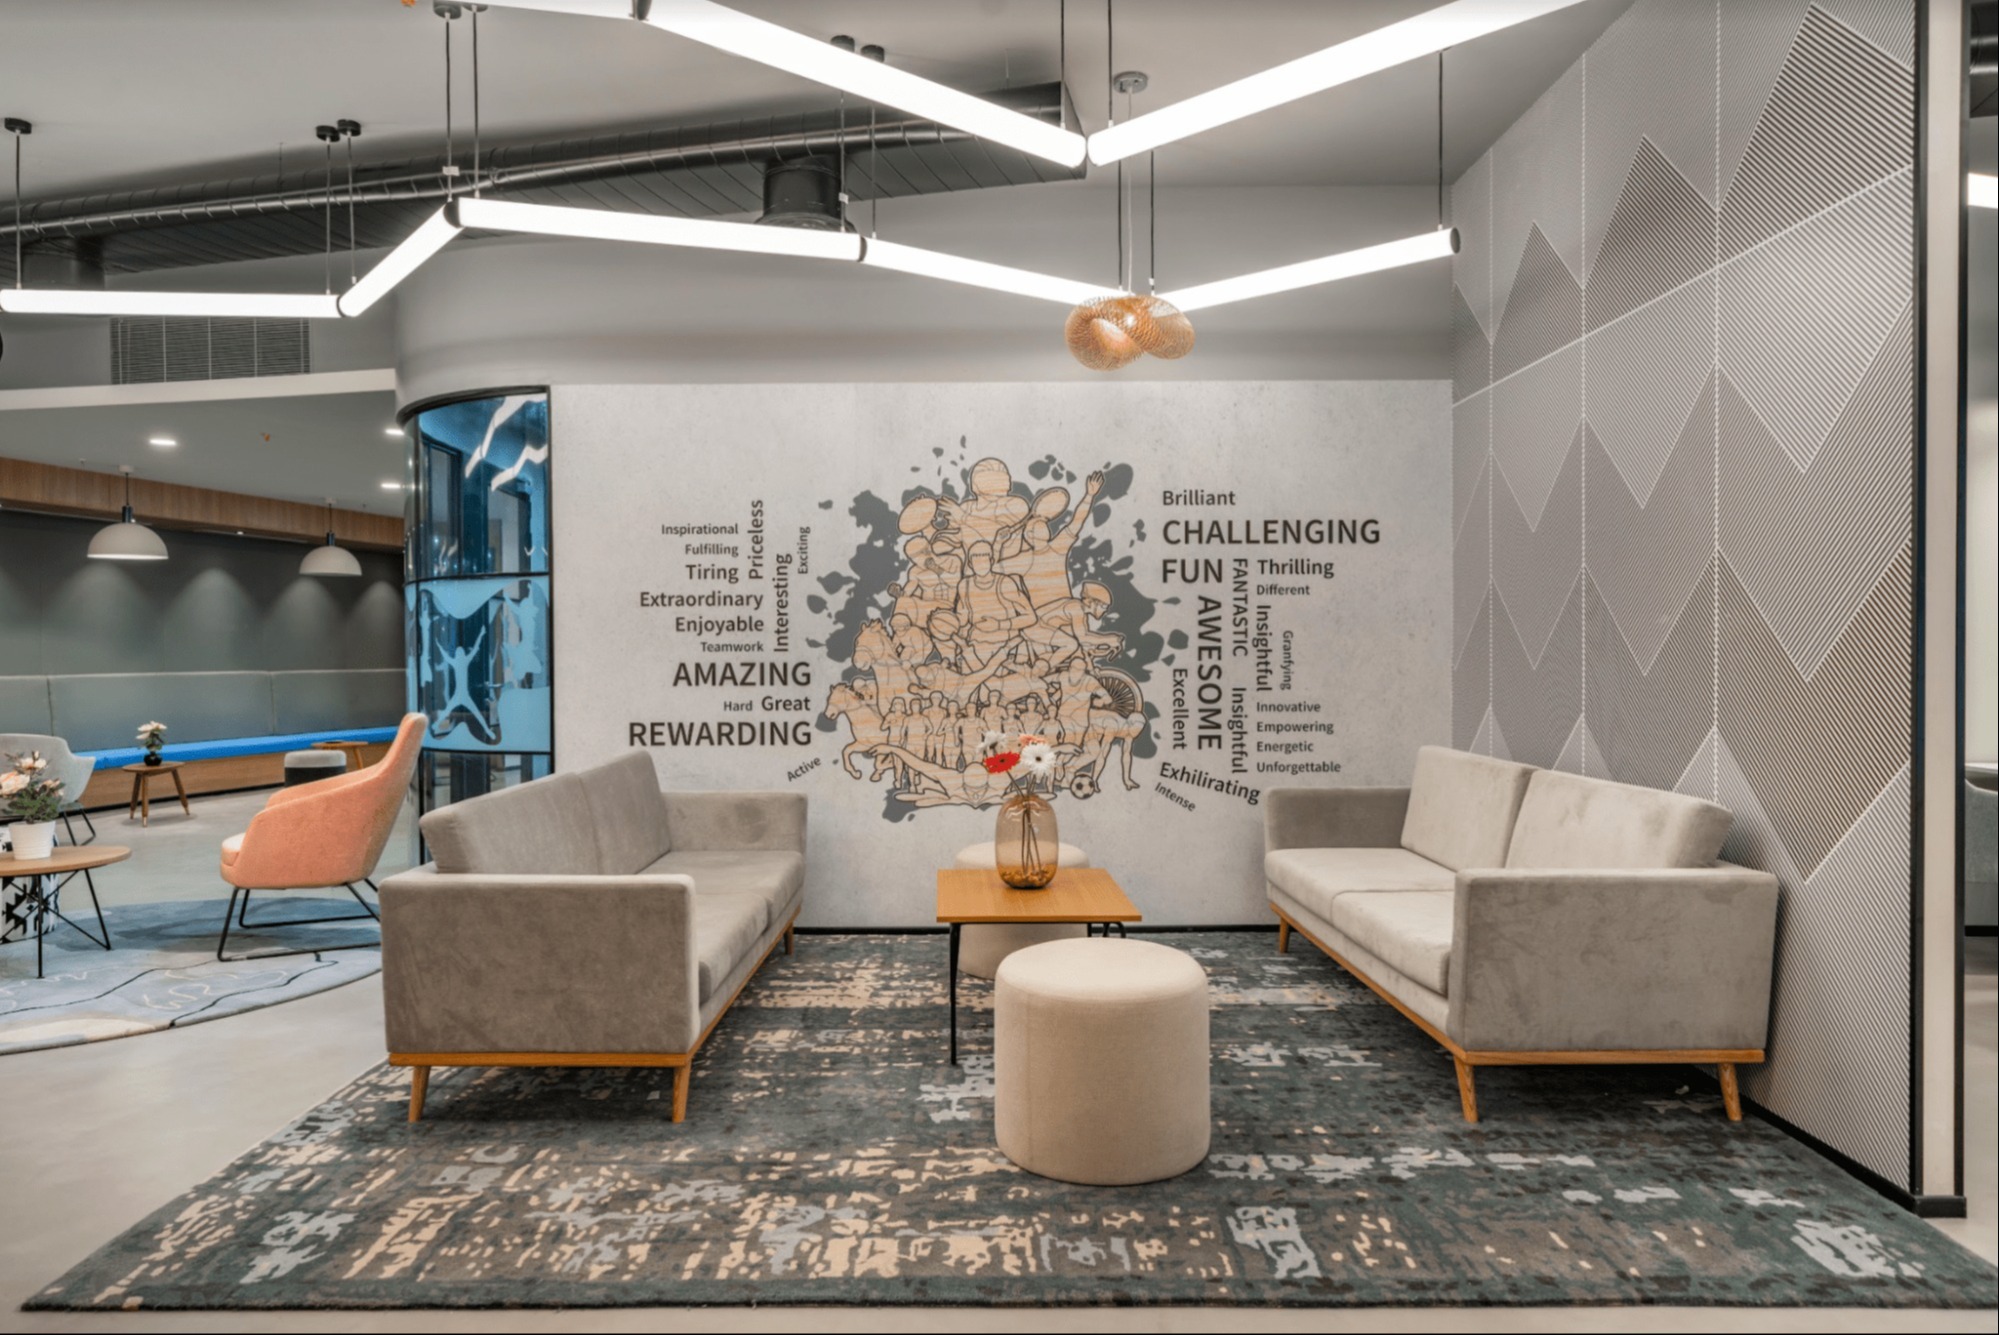 Space Matrix’s workplace design for Verizon Hyderabad resulted in employee resilience in uncertain times